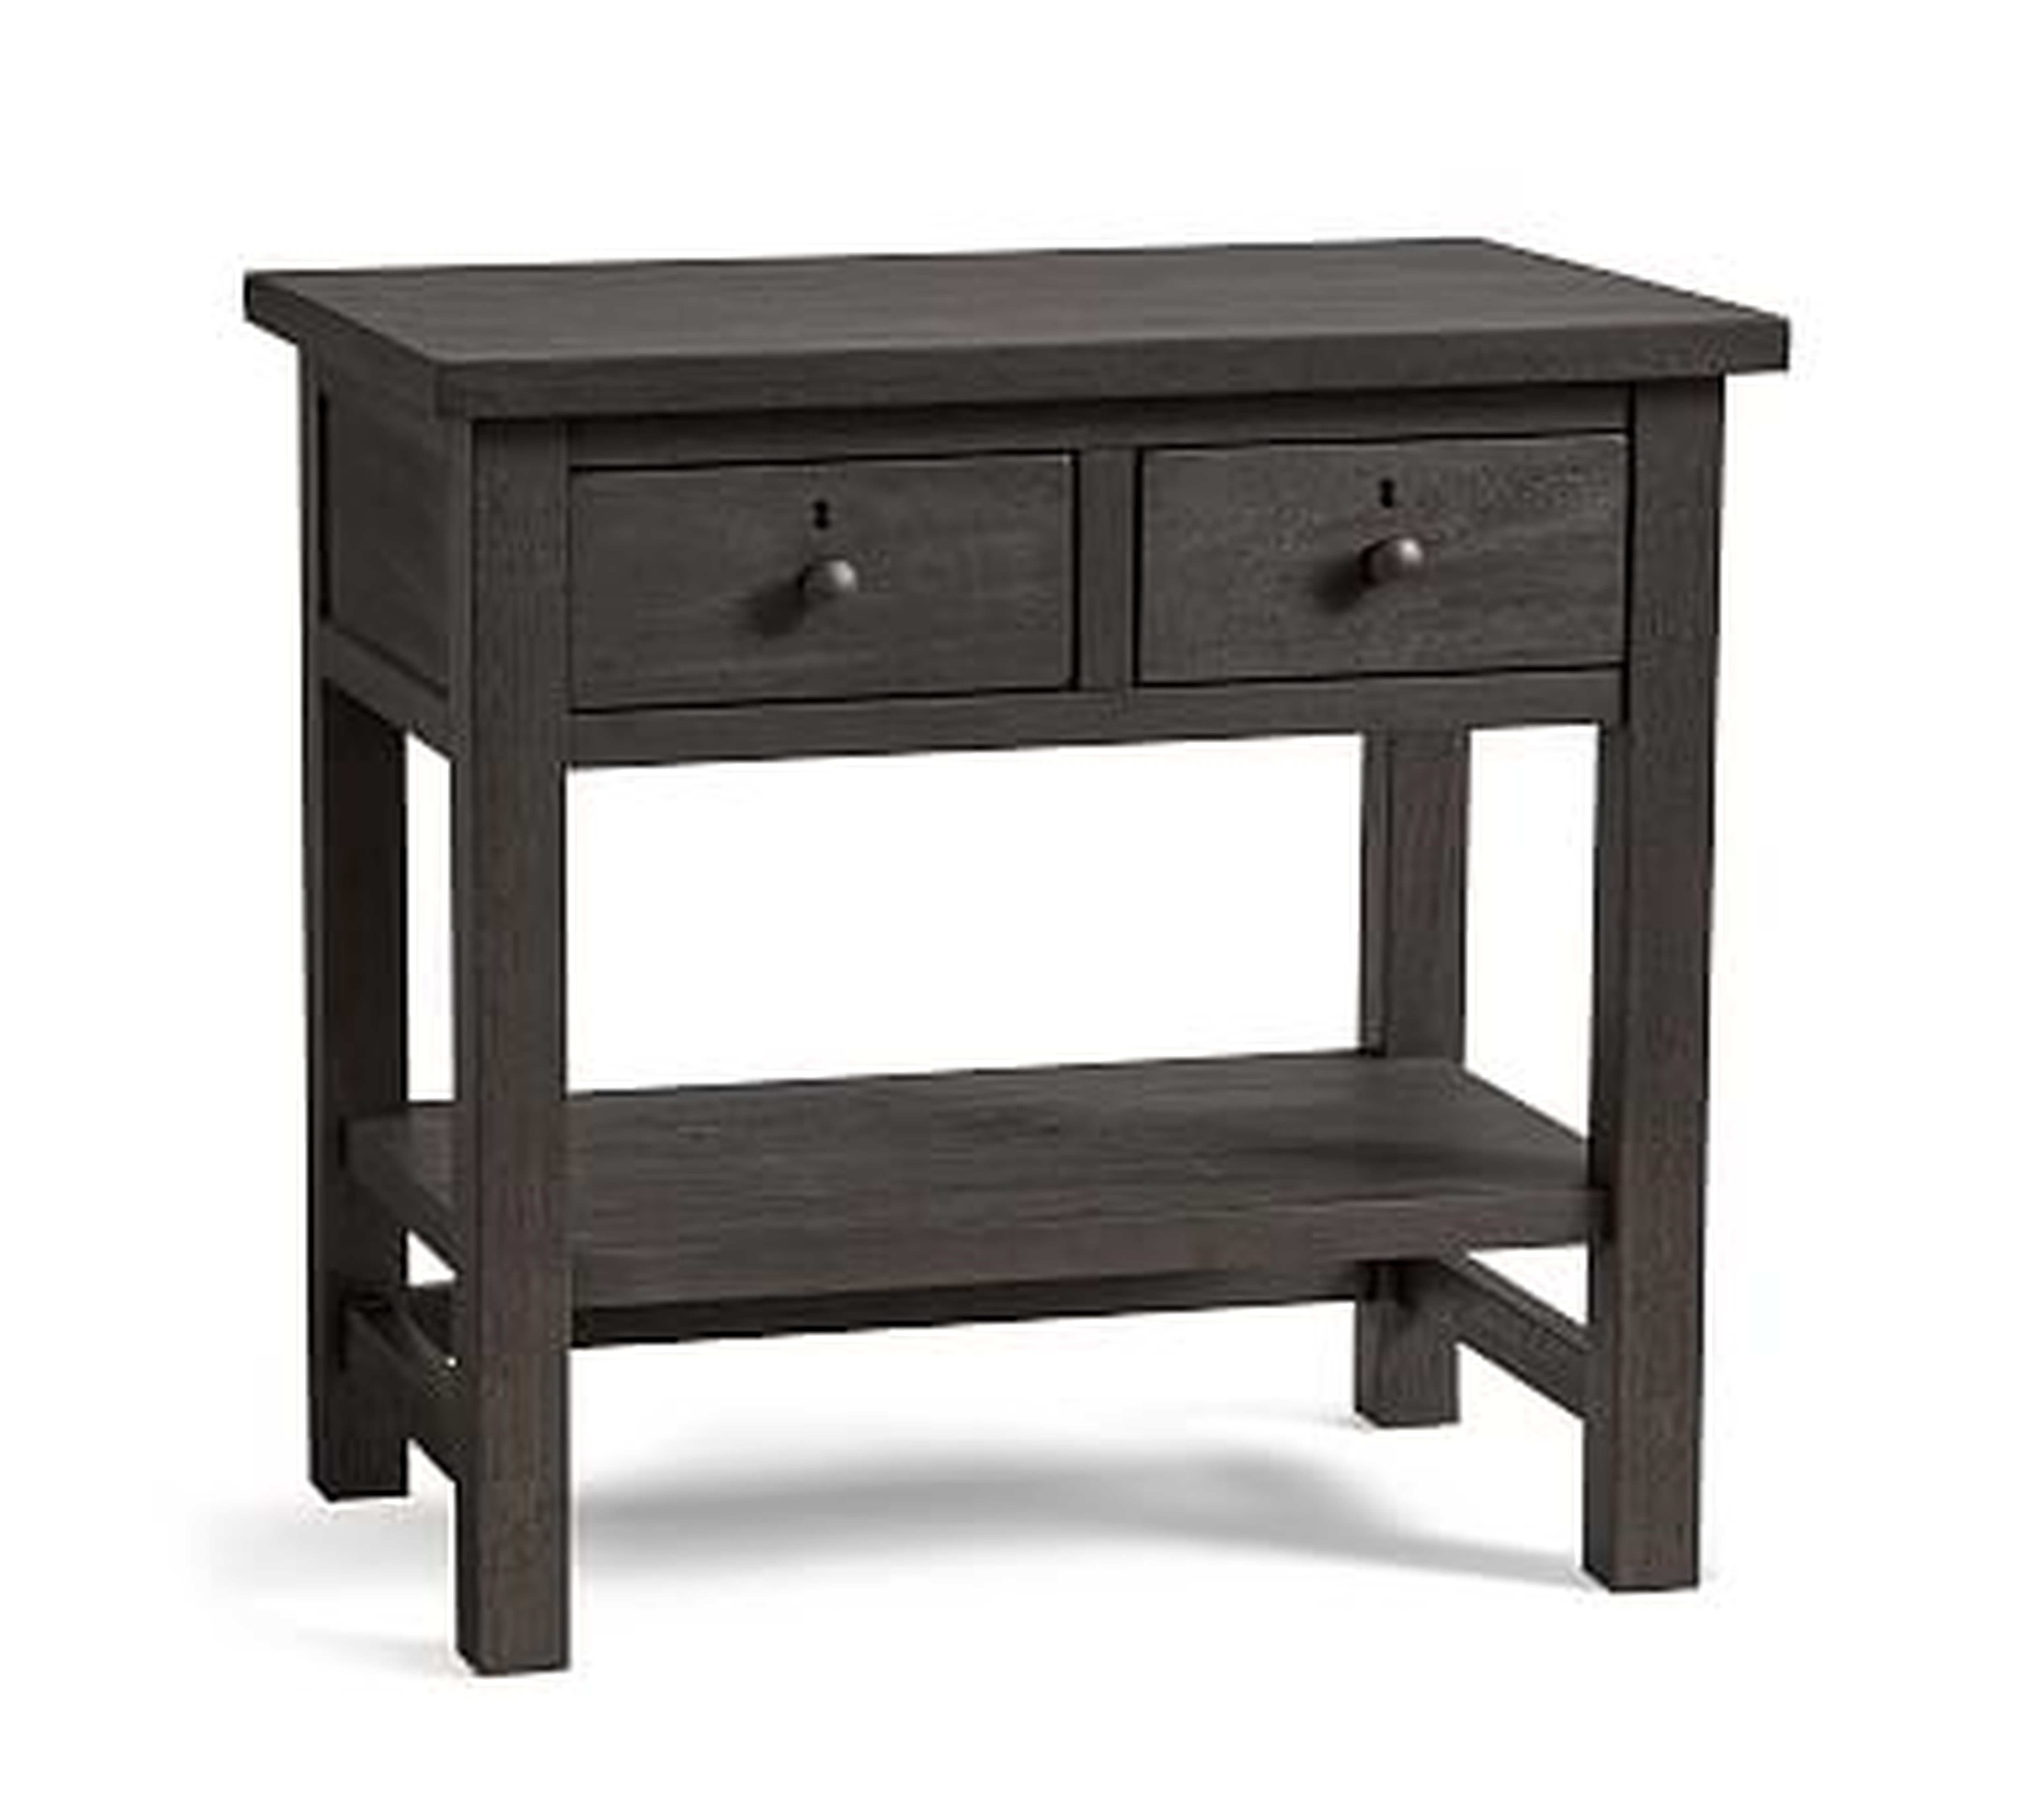 Farmhouse 28.5" 2-Drawer Nightstand, Charcoal - Pottery Barn